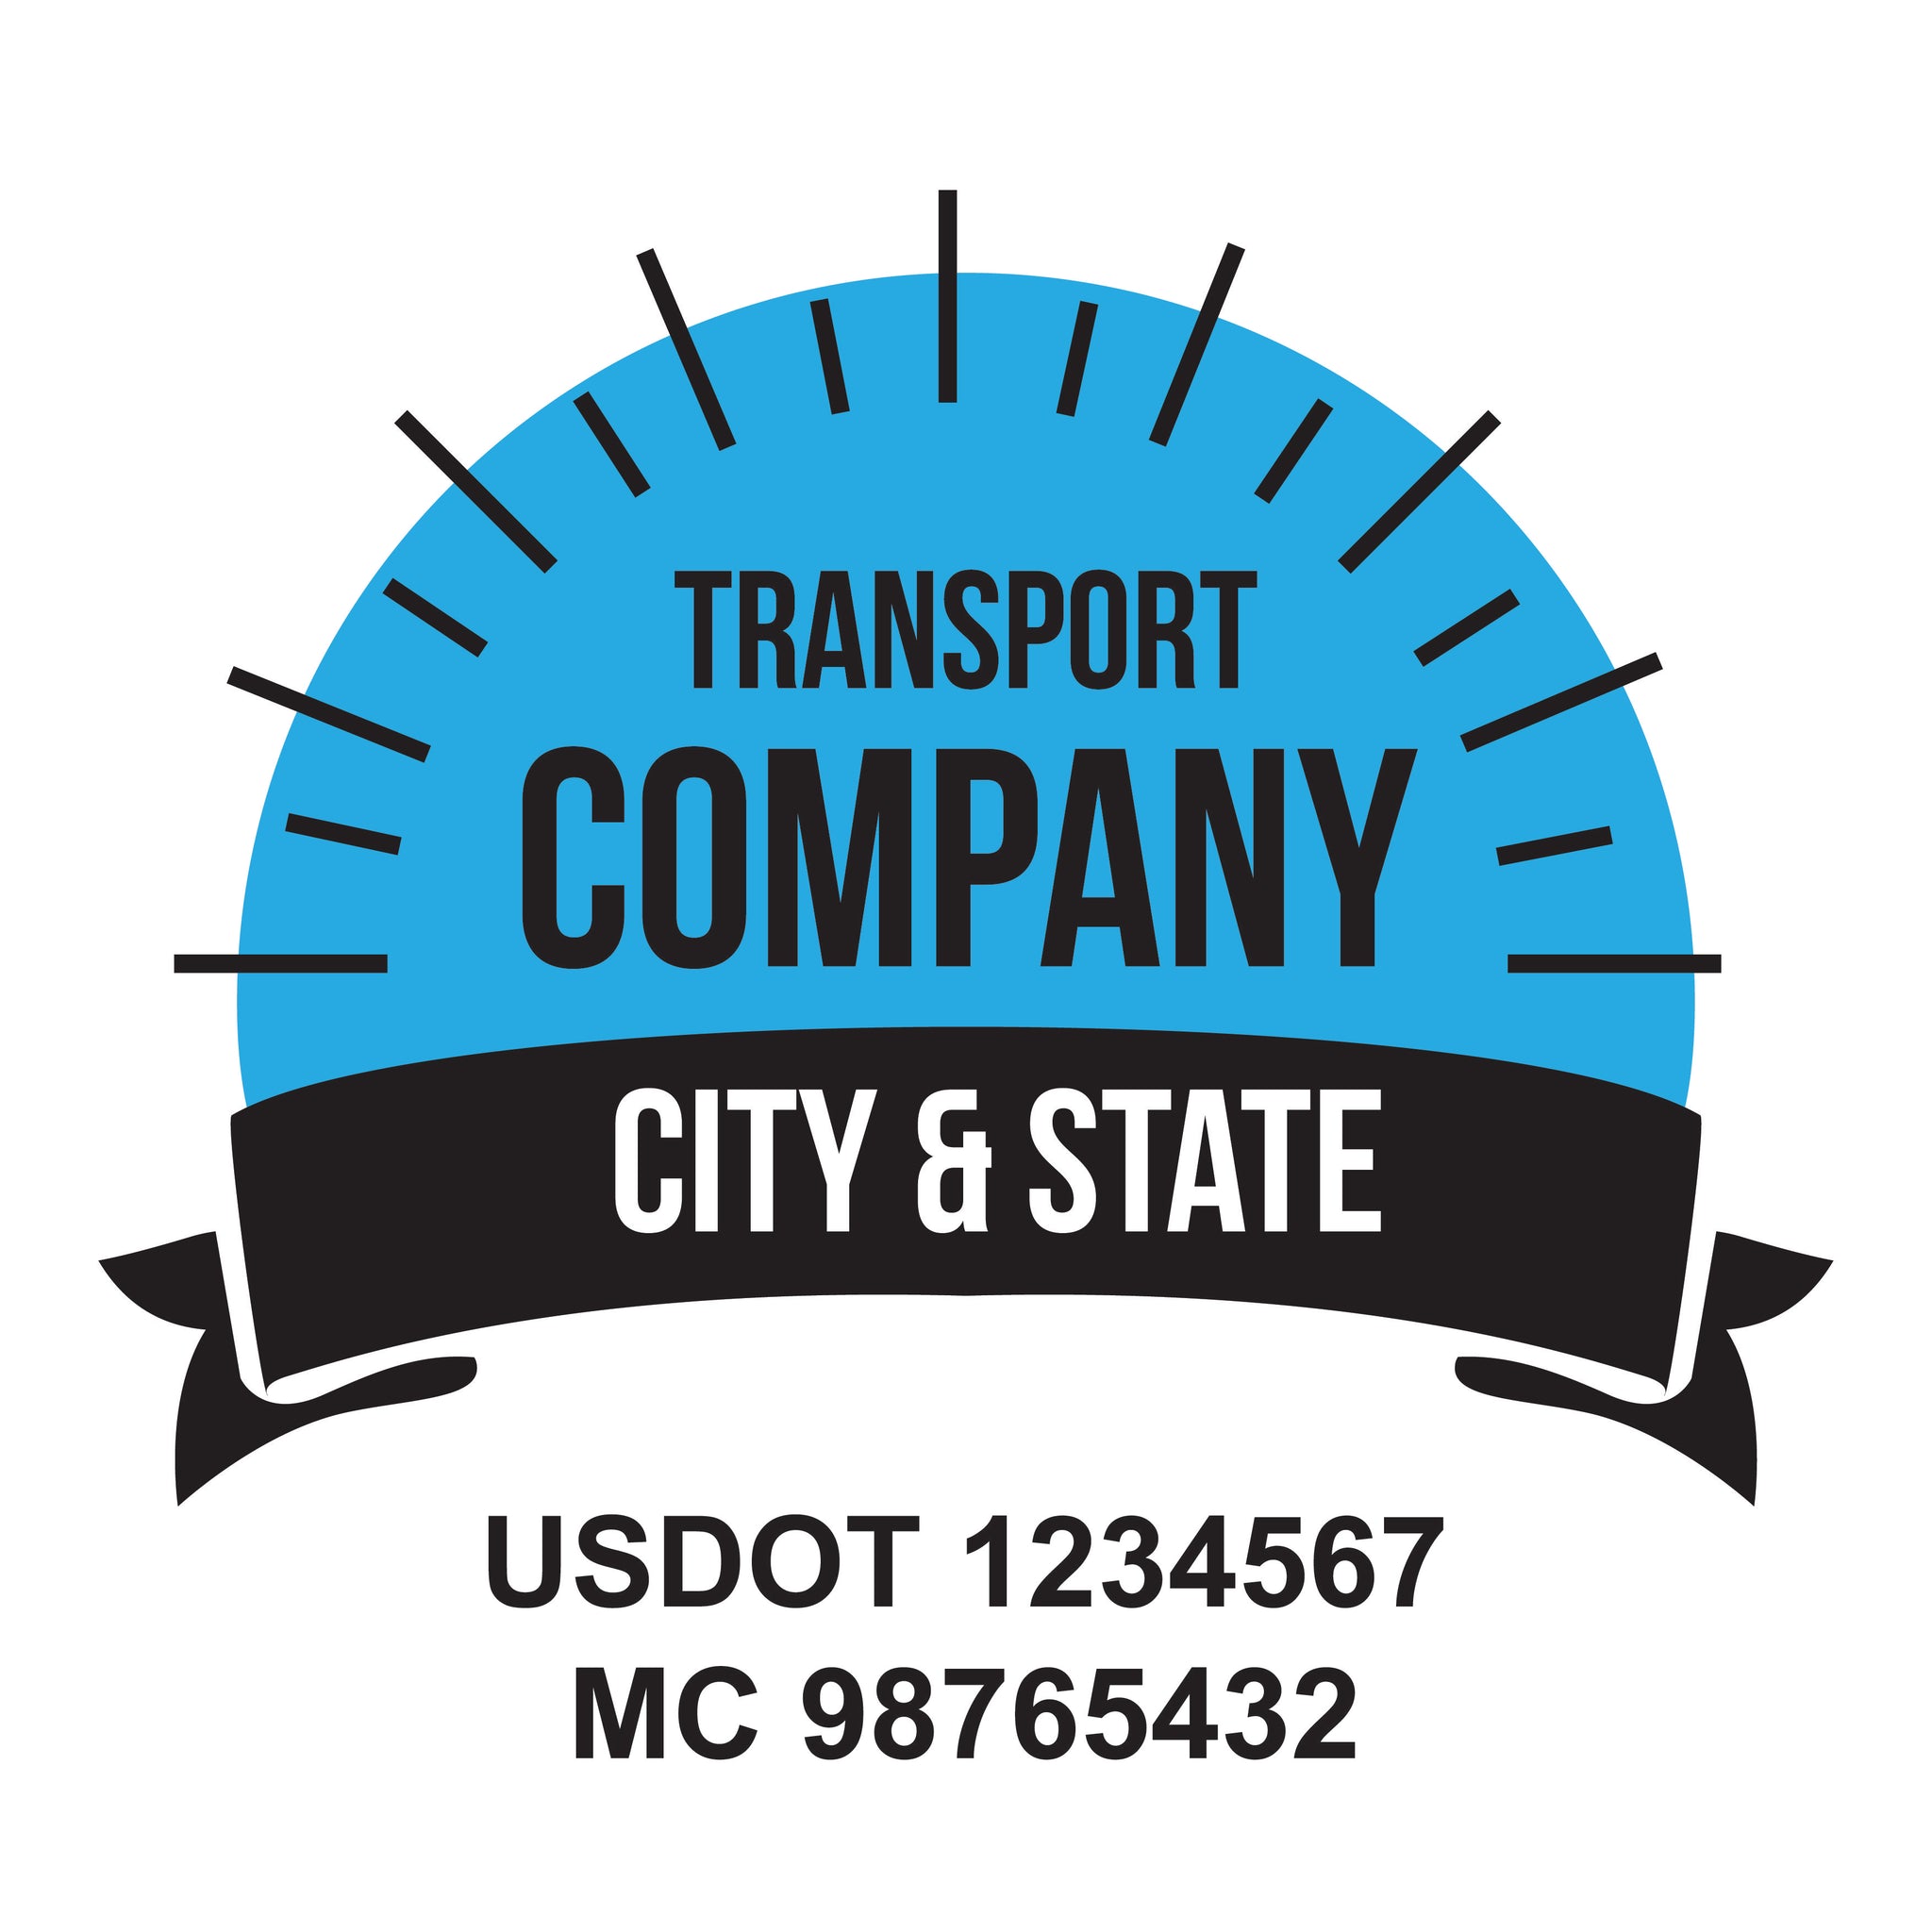 Company name transports decal